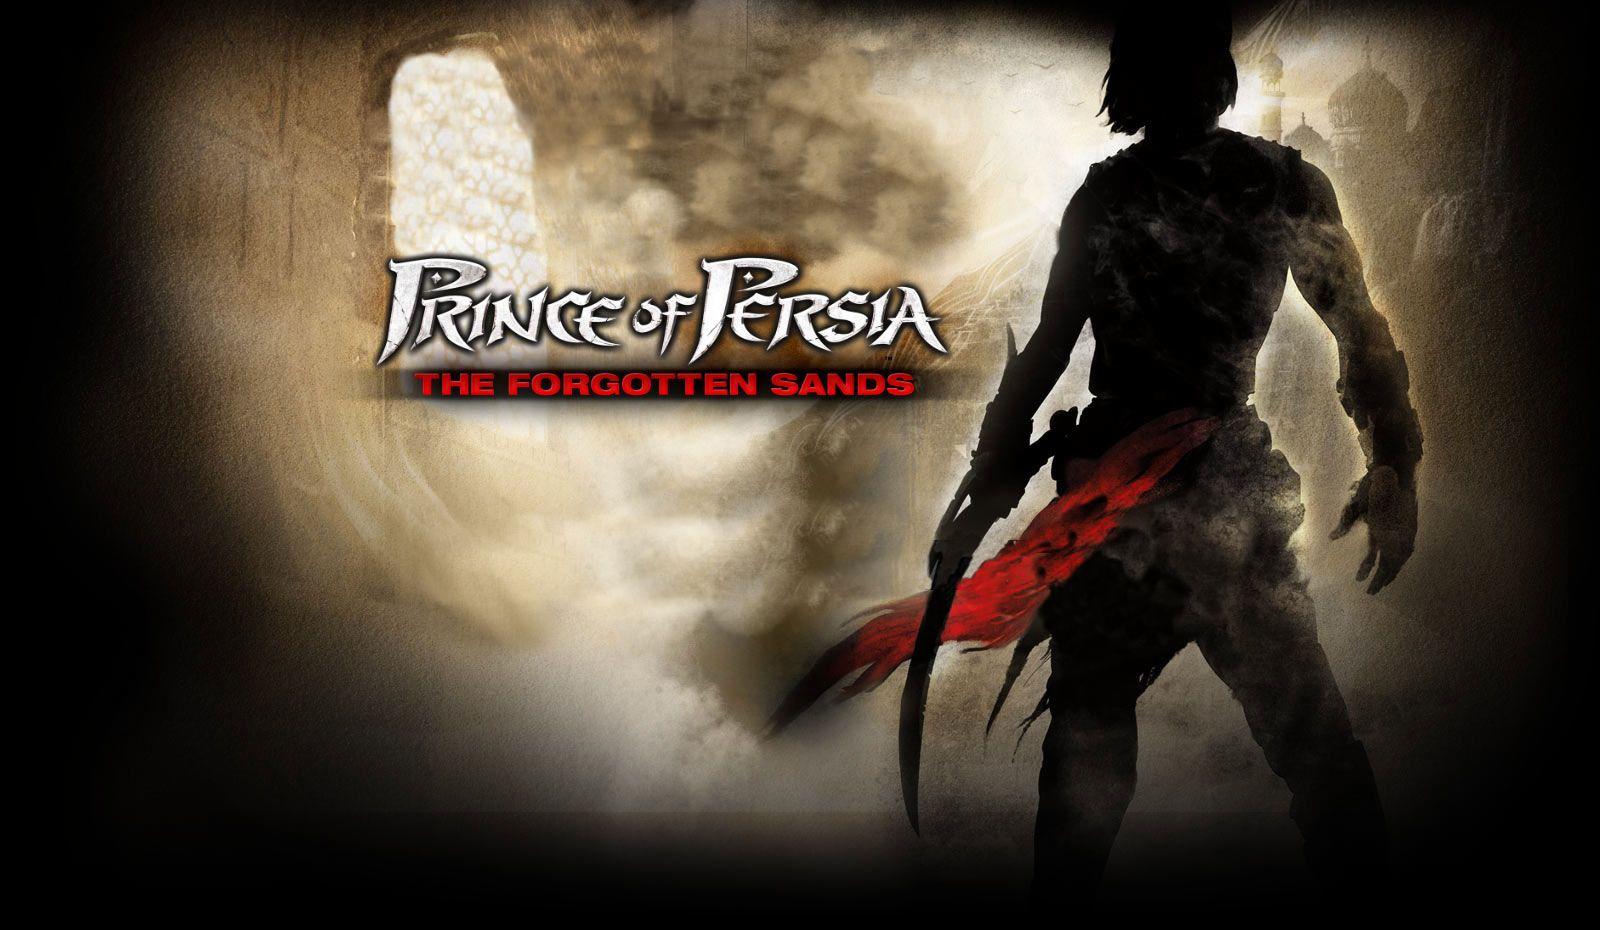 Prince of Persia The Forgotten